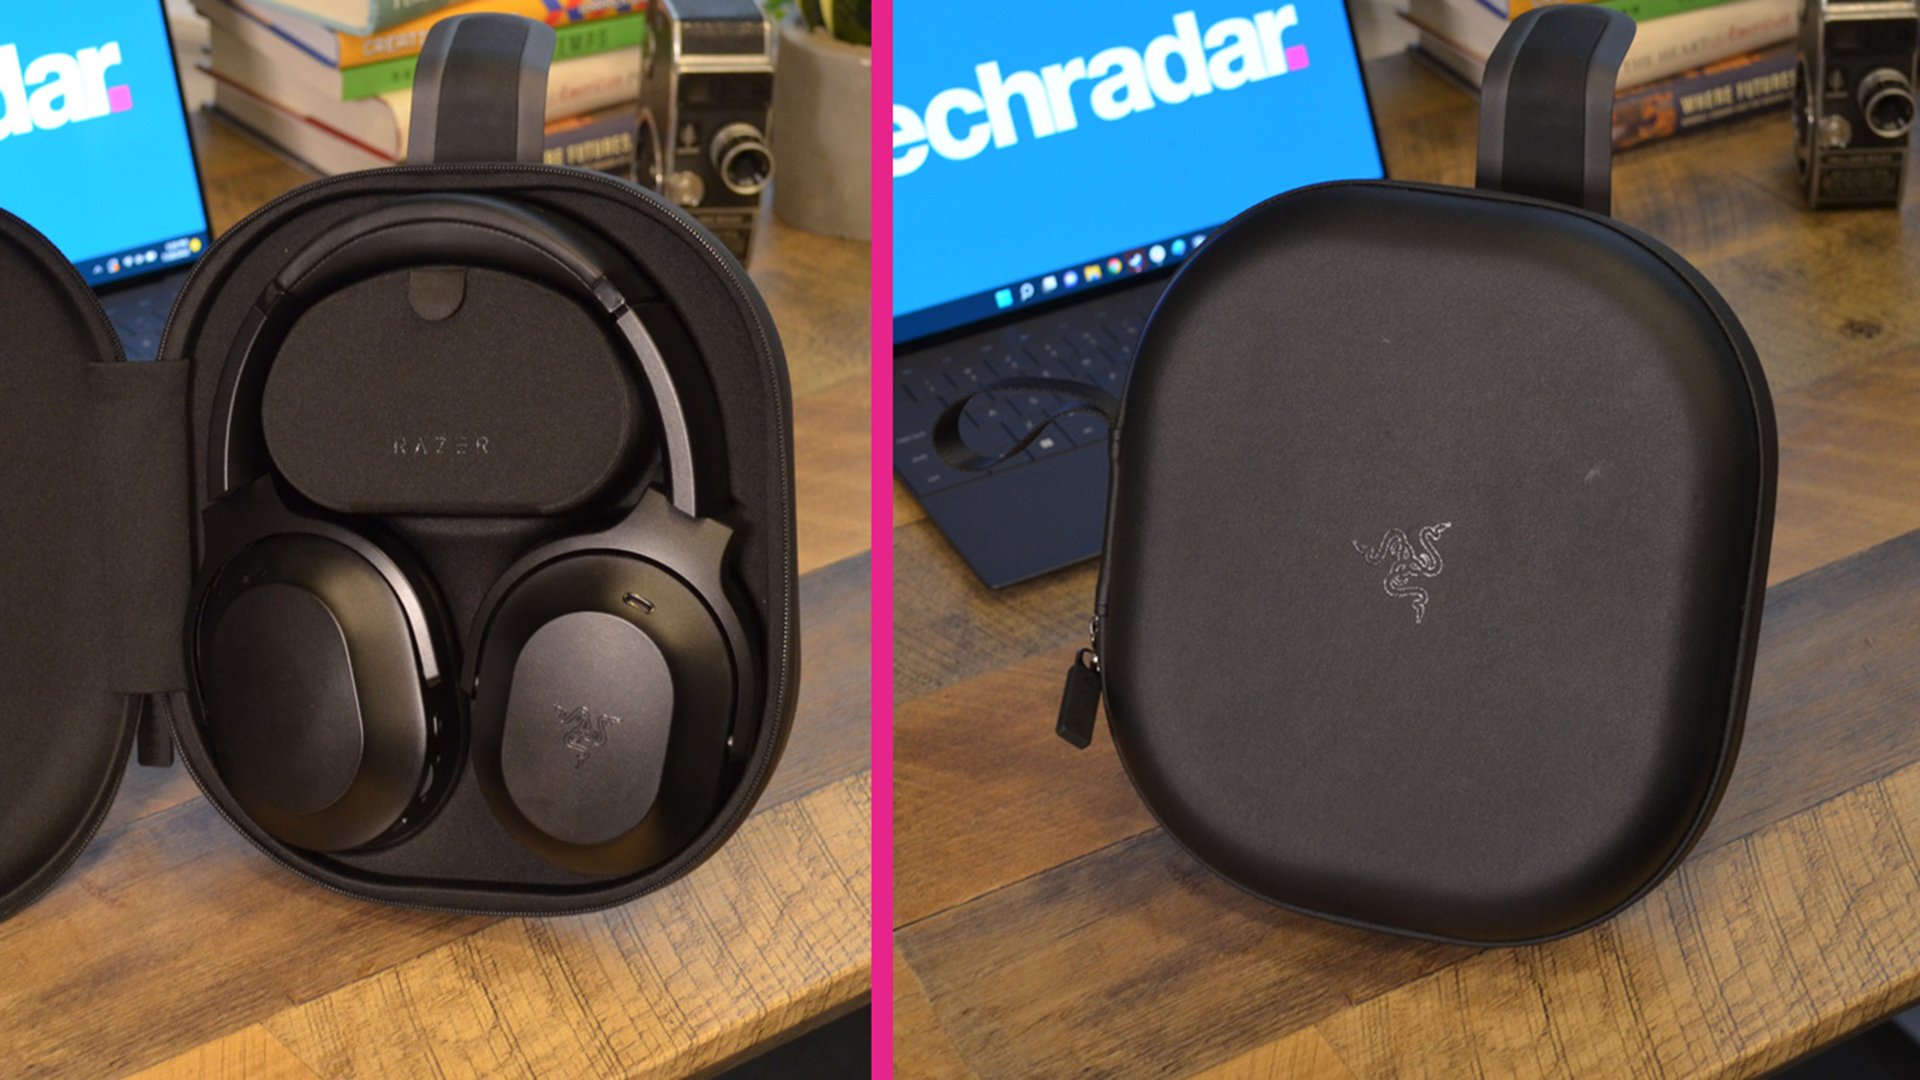 A Razer Barracuda Pro wearing a headset in front of a computer with a Techradar logo.